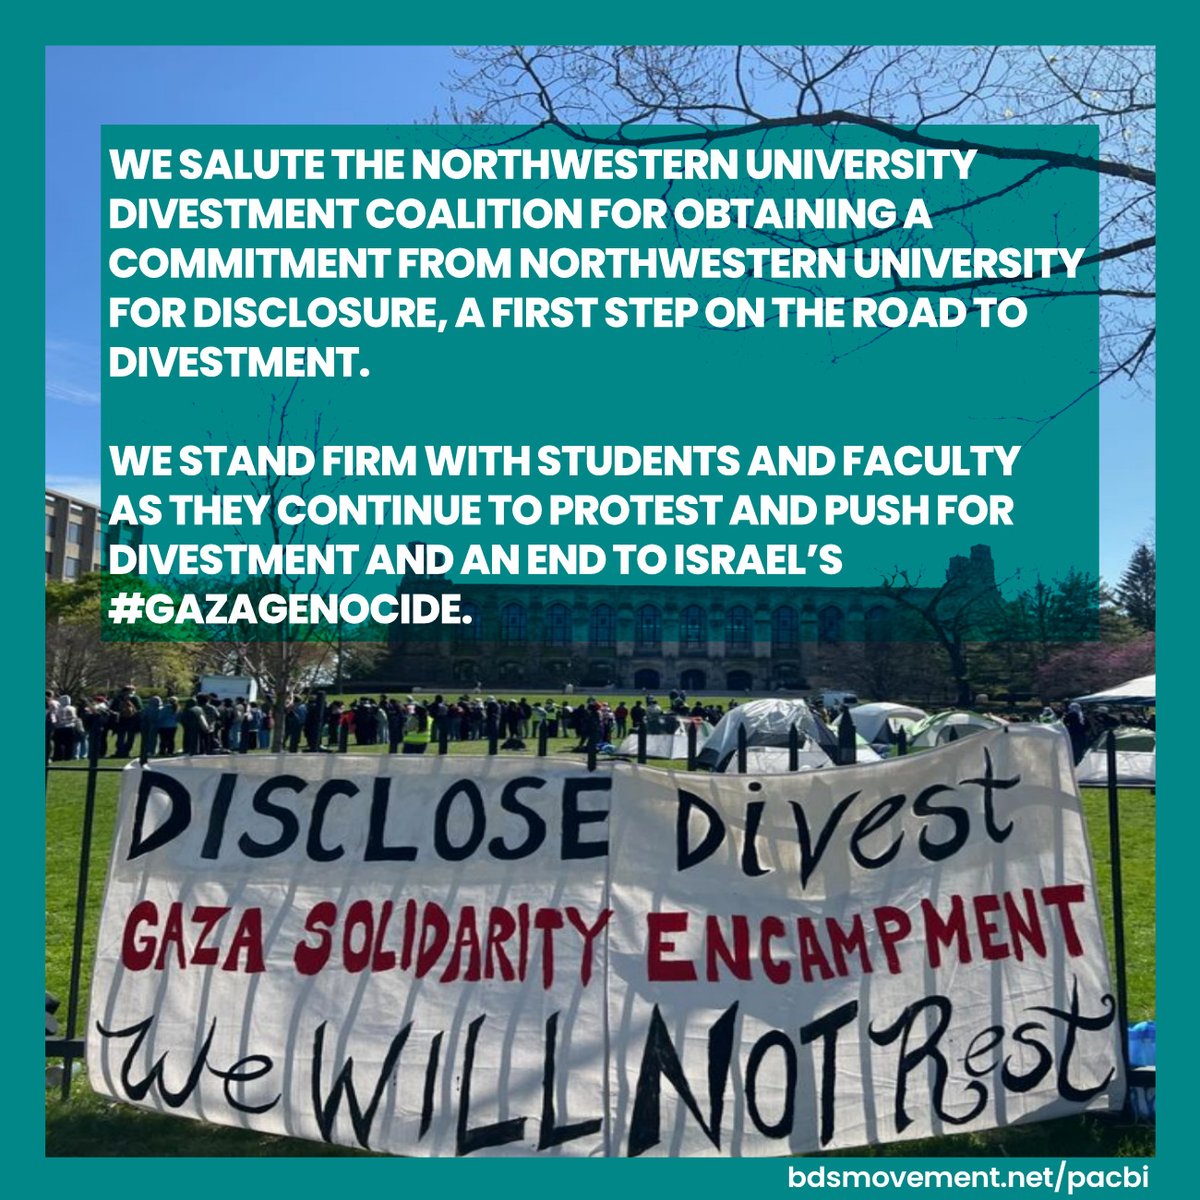 We salute the Northwestern University Divestment Coalition for obtaining a commitment from @NorthwesternU for disclosure, a first step toward divestment. We stand firm with students and faculty as they continue to protest & push for divestment & an end to Israel’s #GazaGenocide.